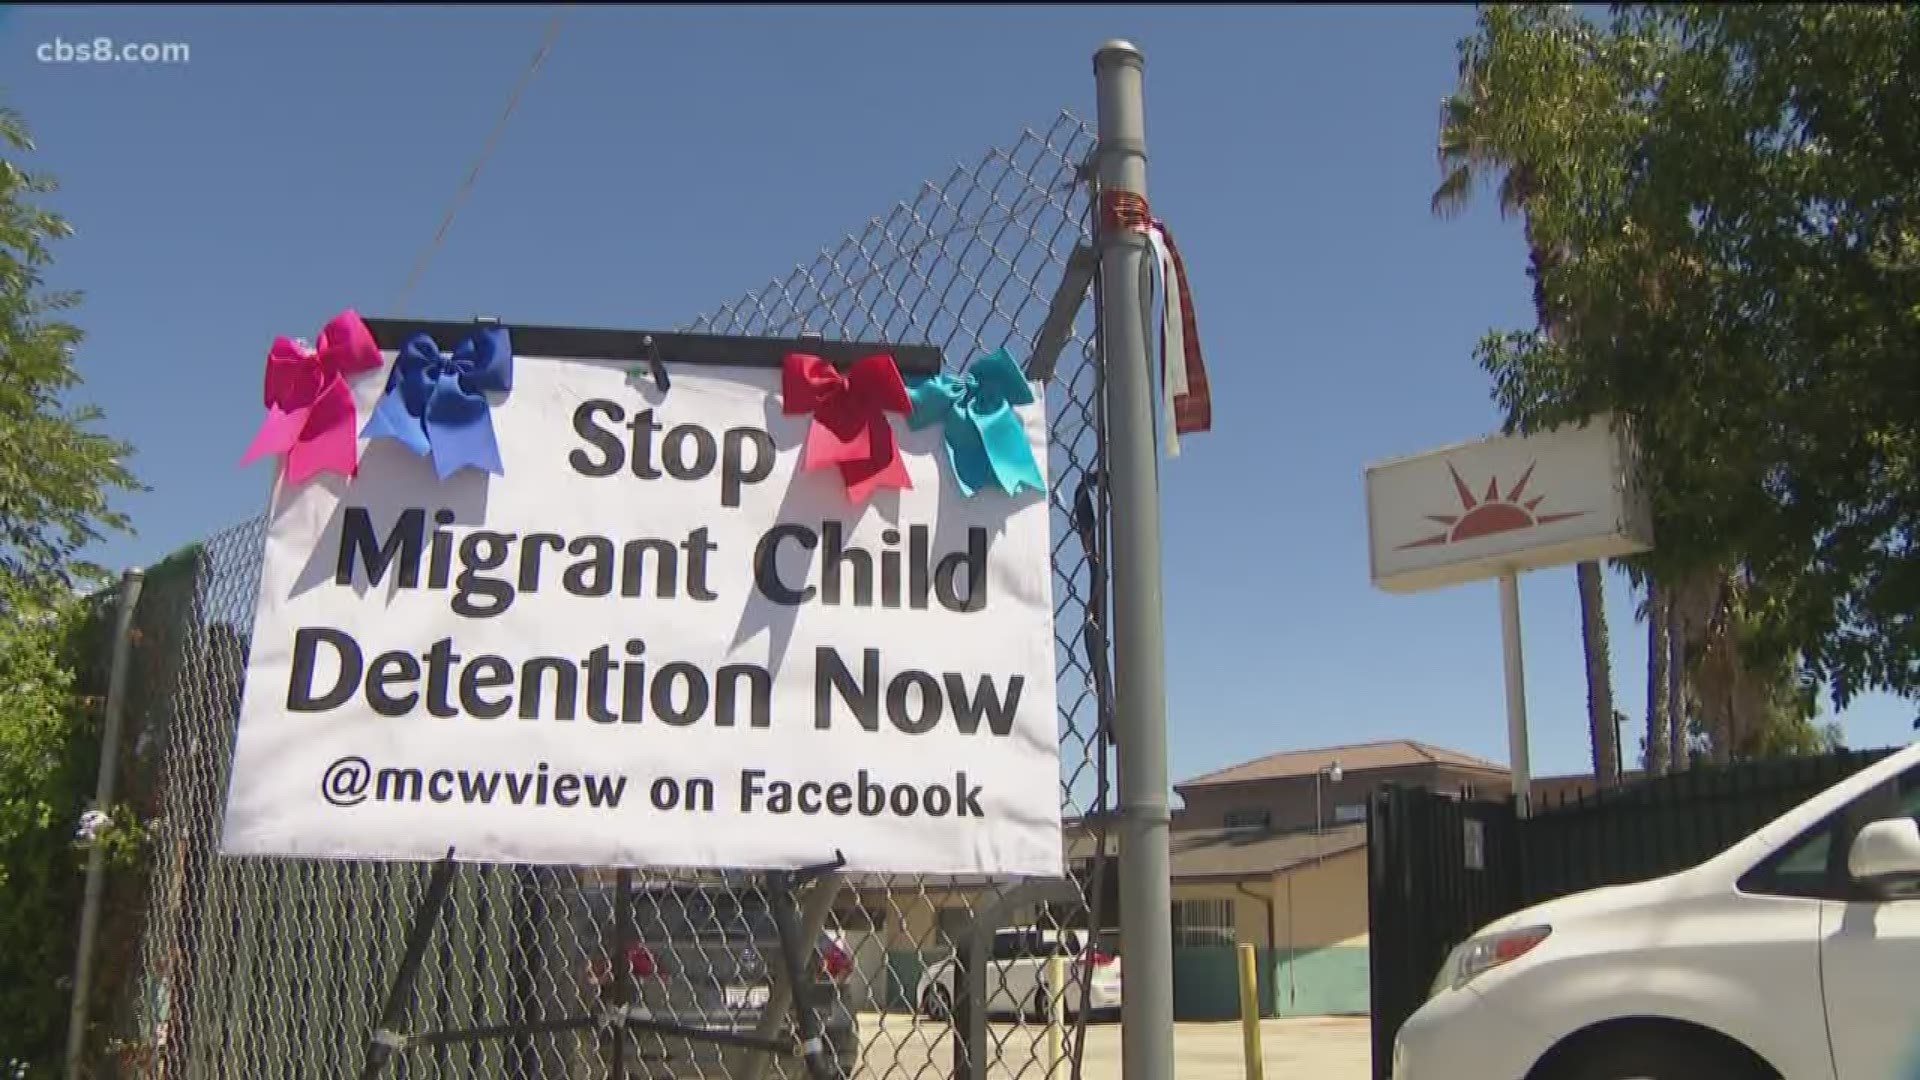 A small group of protesters on Wednesday gathered outside the Southwest Key migrant detention facility in El Cajon, armed with signs and multi-colored ribbons. 

The group Migrant Child Watch, organized the protest in a show of support for the migrant children inside the facility.